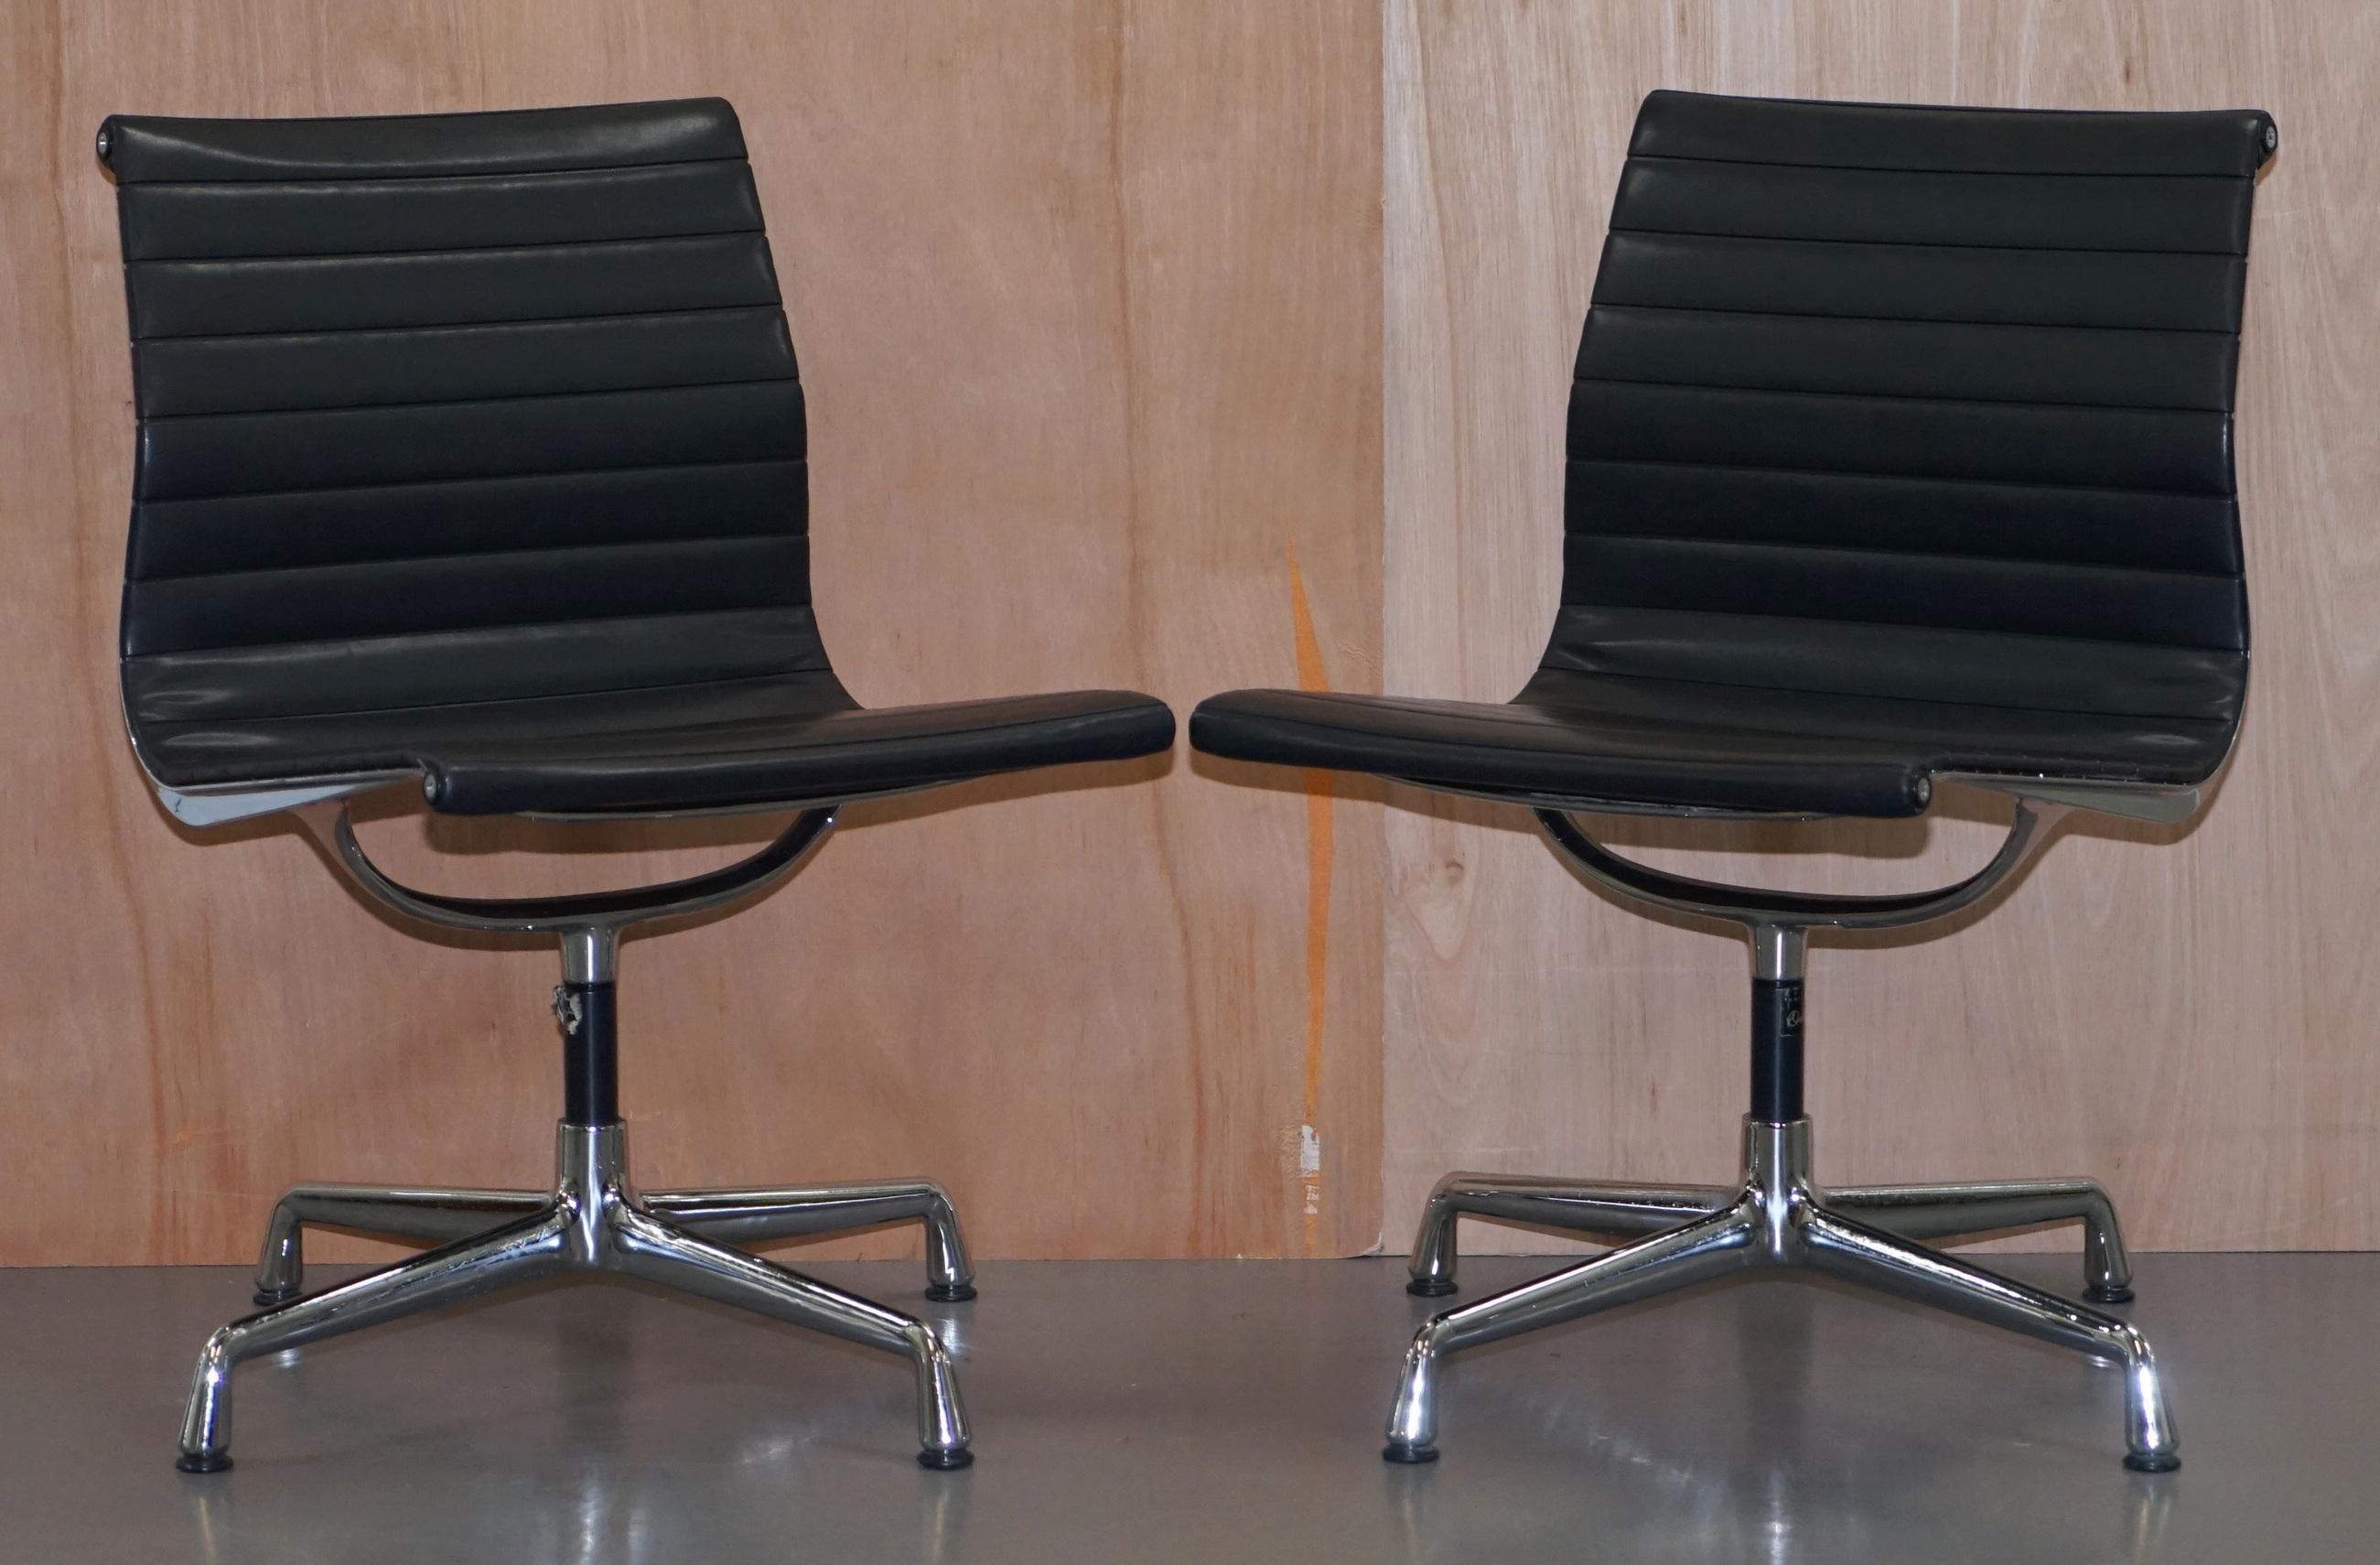 We are delighted to offer for sale this stunning 1 of 2 of vintage Charles Eames Vitra black leather EA101 office swivel chairs RRP £1891 each

This auction is for one chair with the option to buy two, the retail for one chair is as mentioned